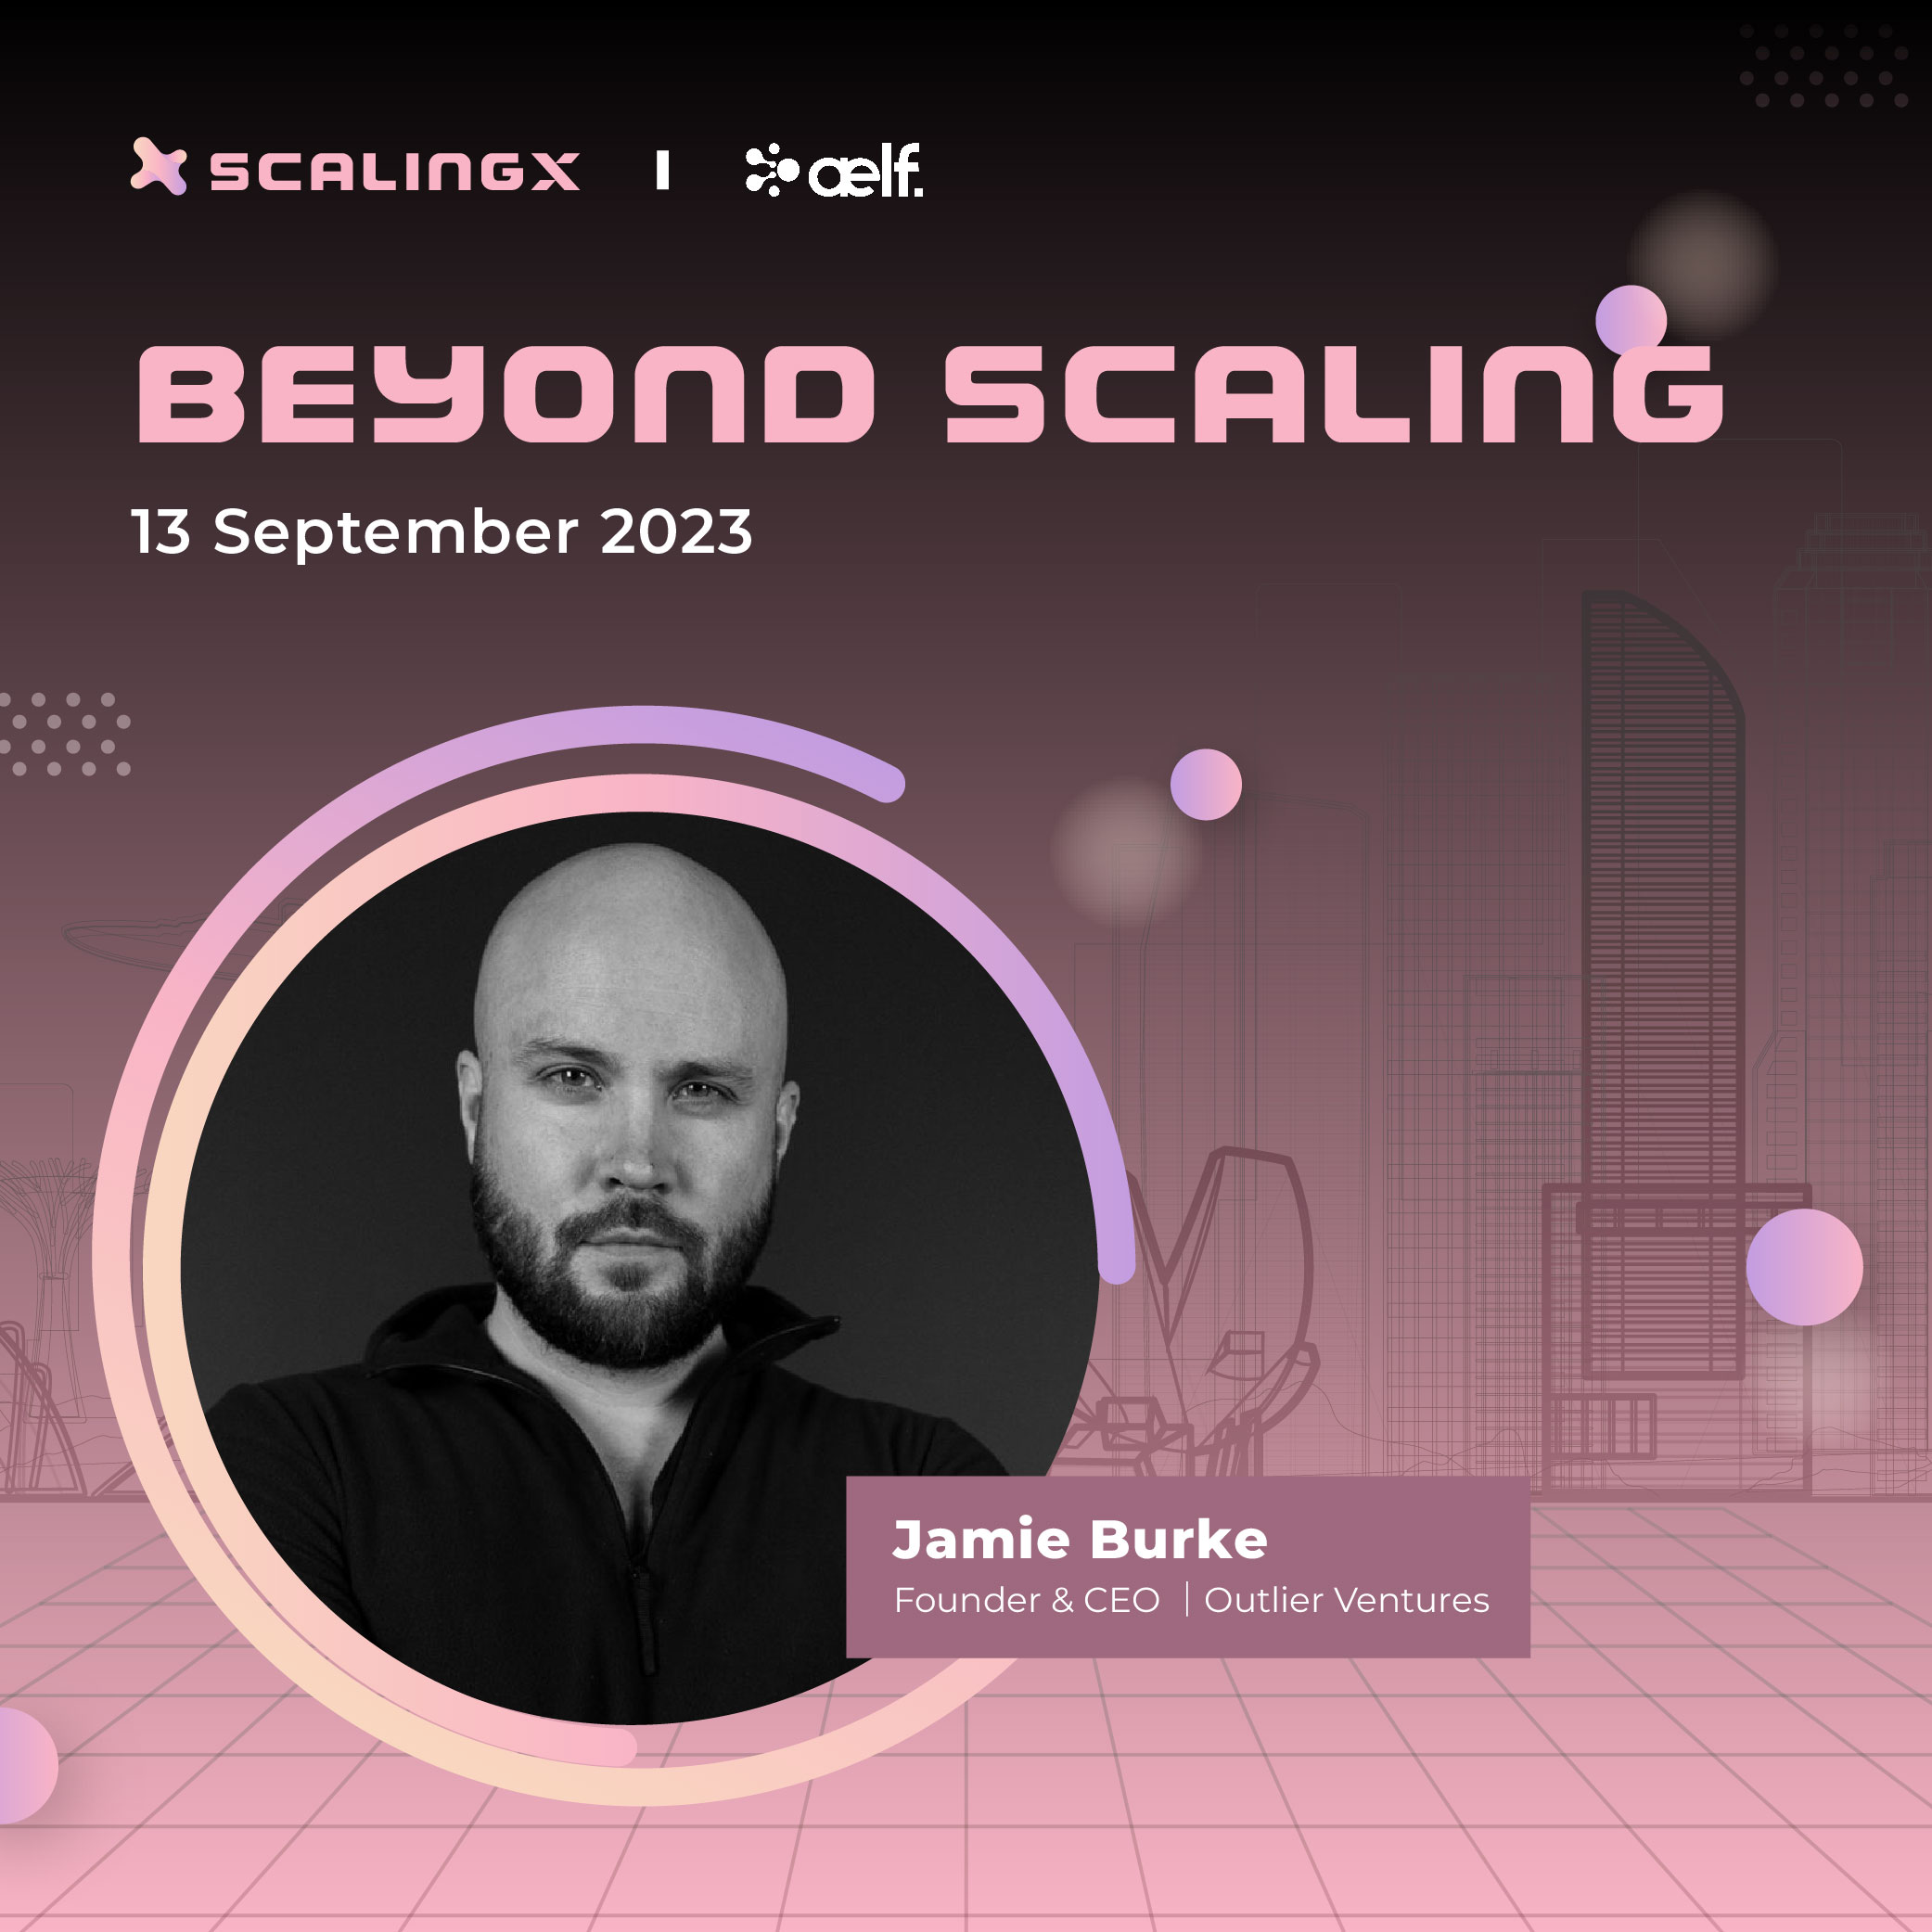 Outlier Ventures 创始人兼首席执行官，Jamie Burke 确认出席 “Beyond Scaling” Token 2049 Afterparty 活动